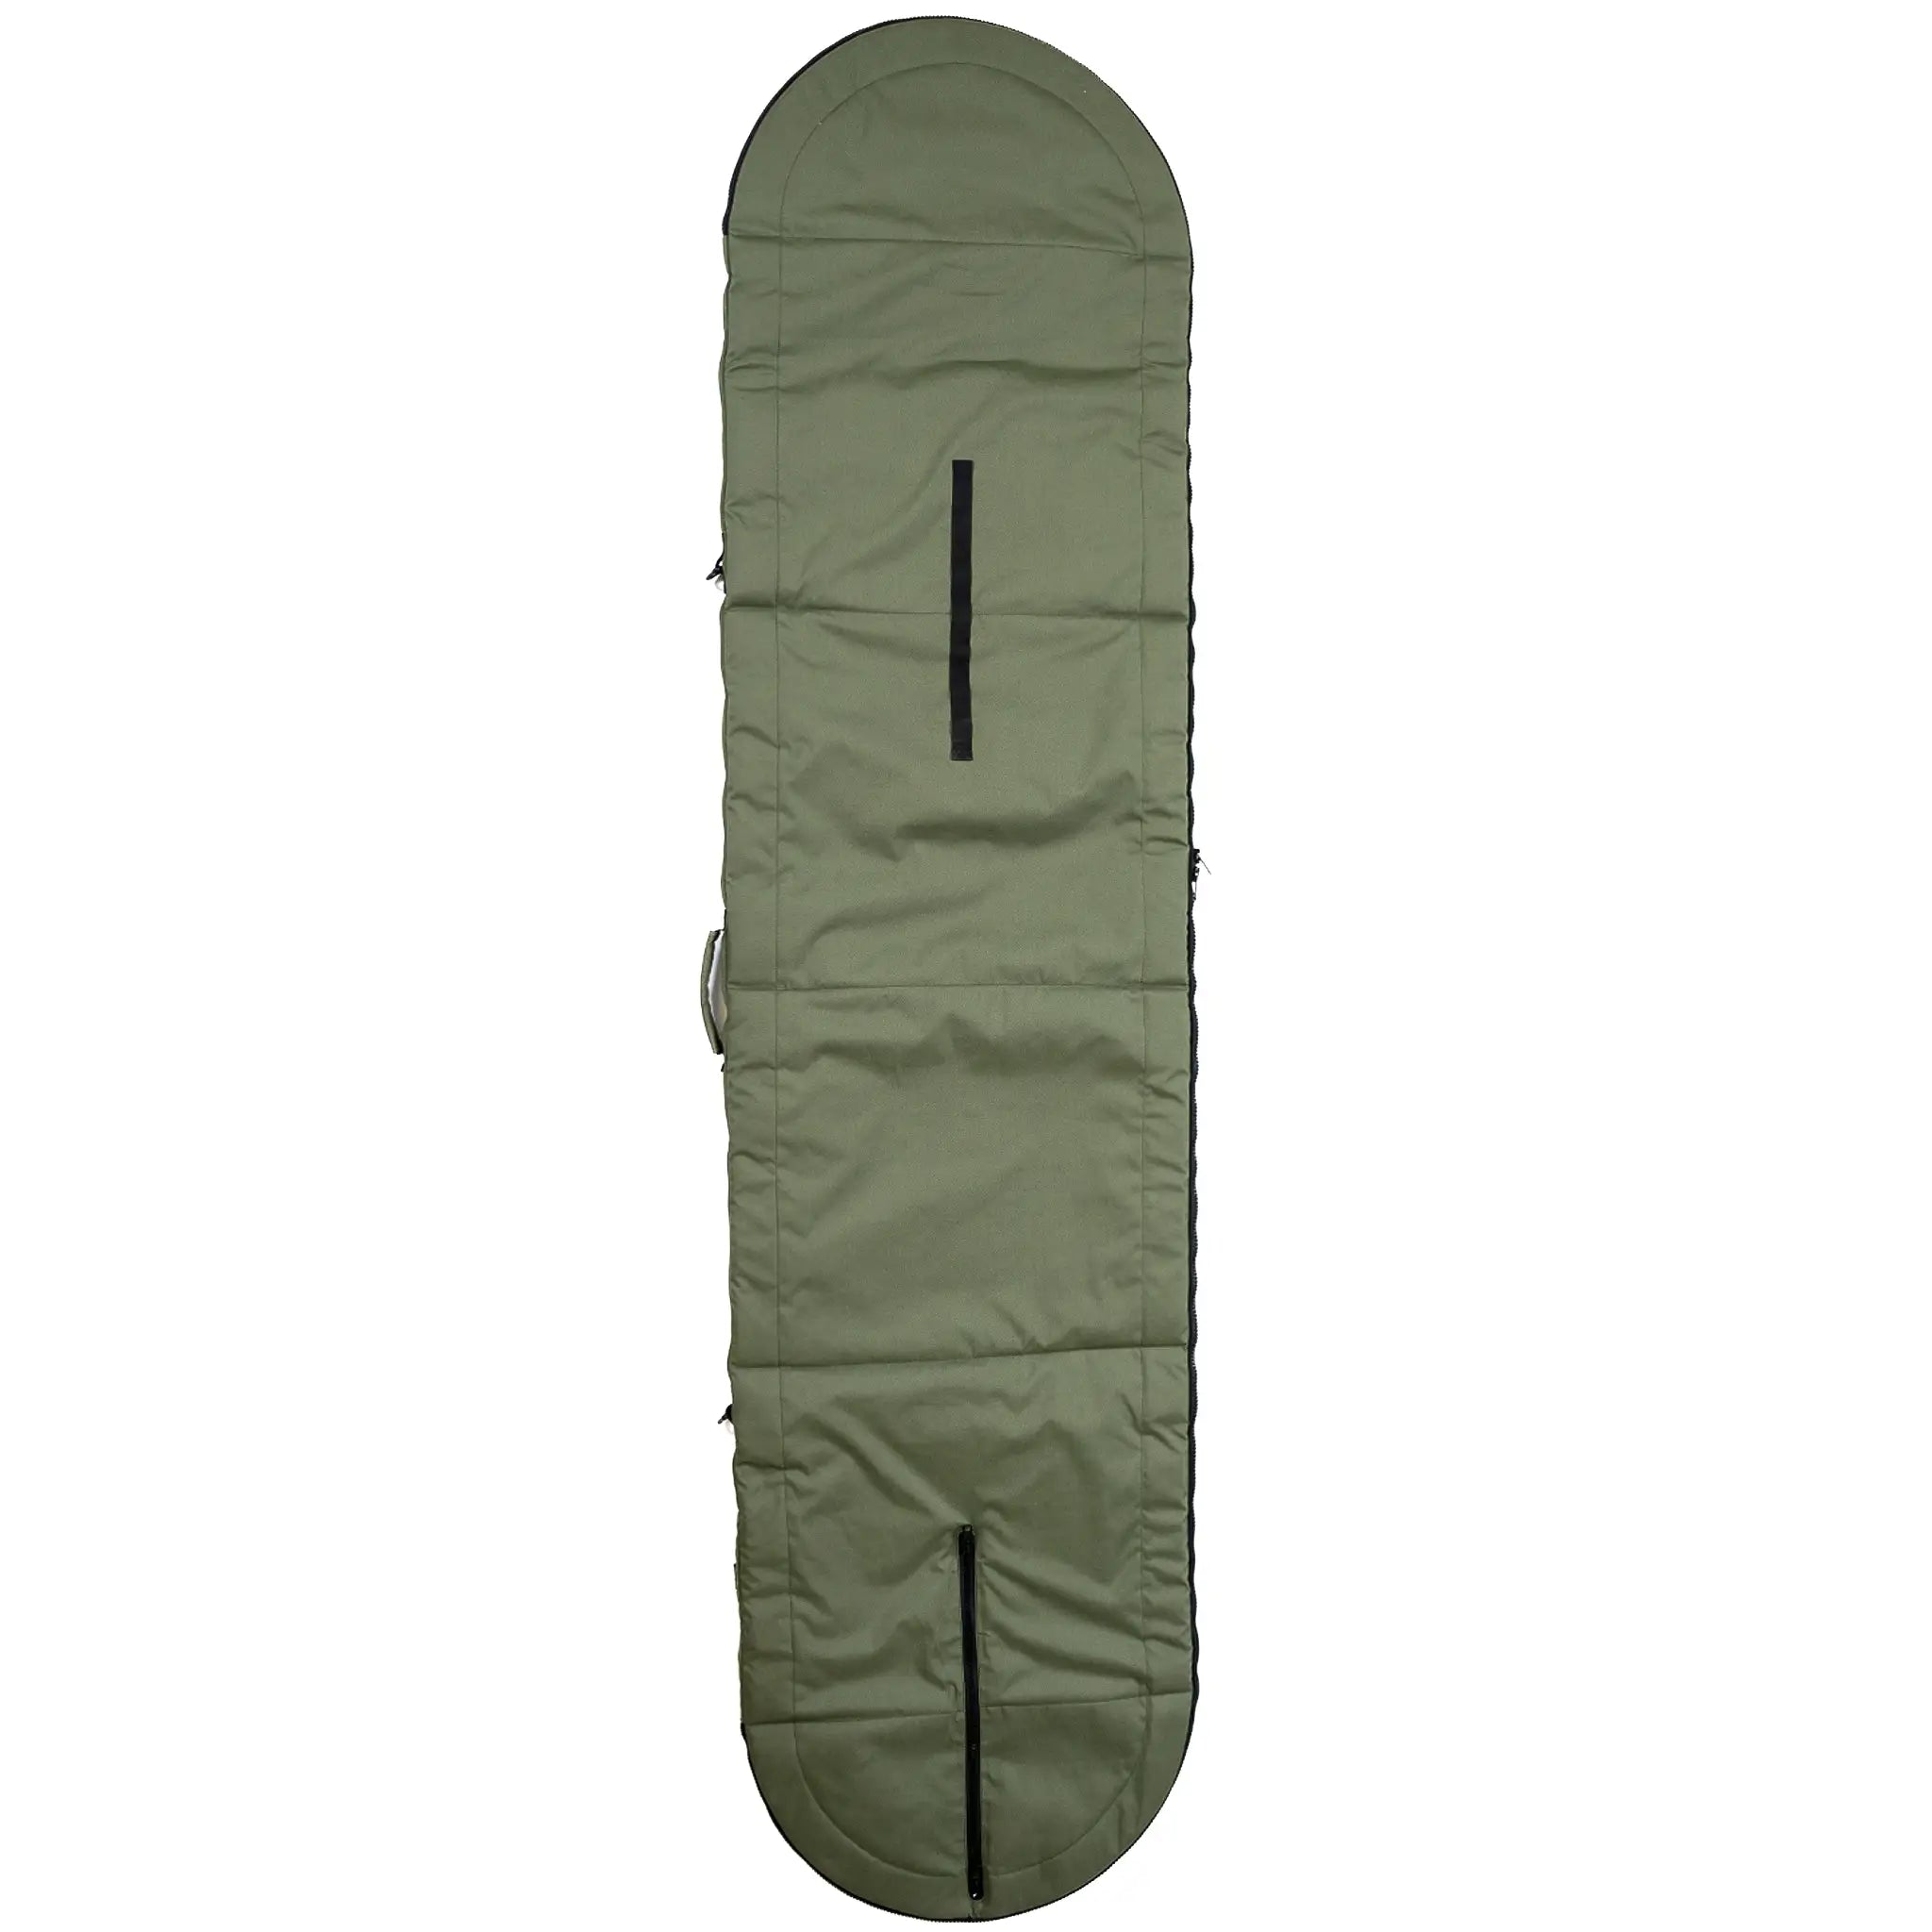 Olive Drab Padded Day / Travel Board Bag